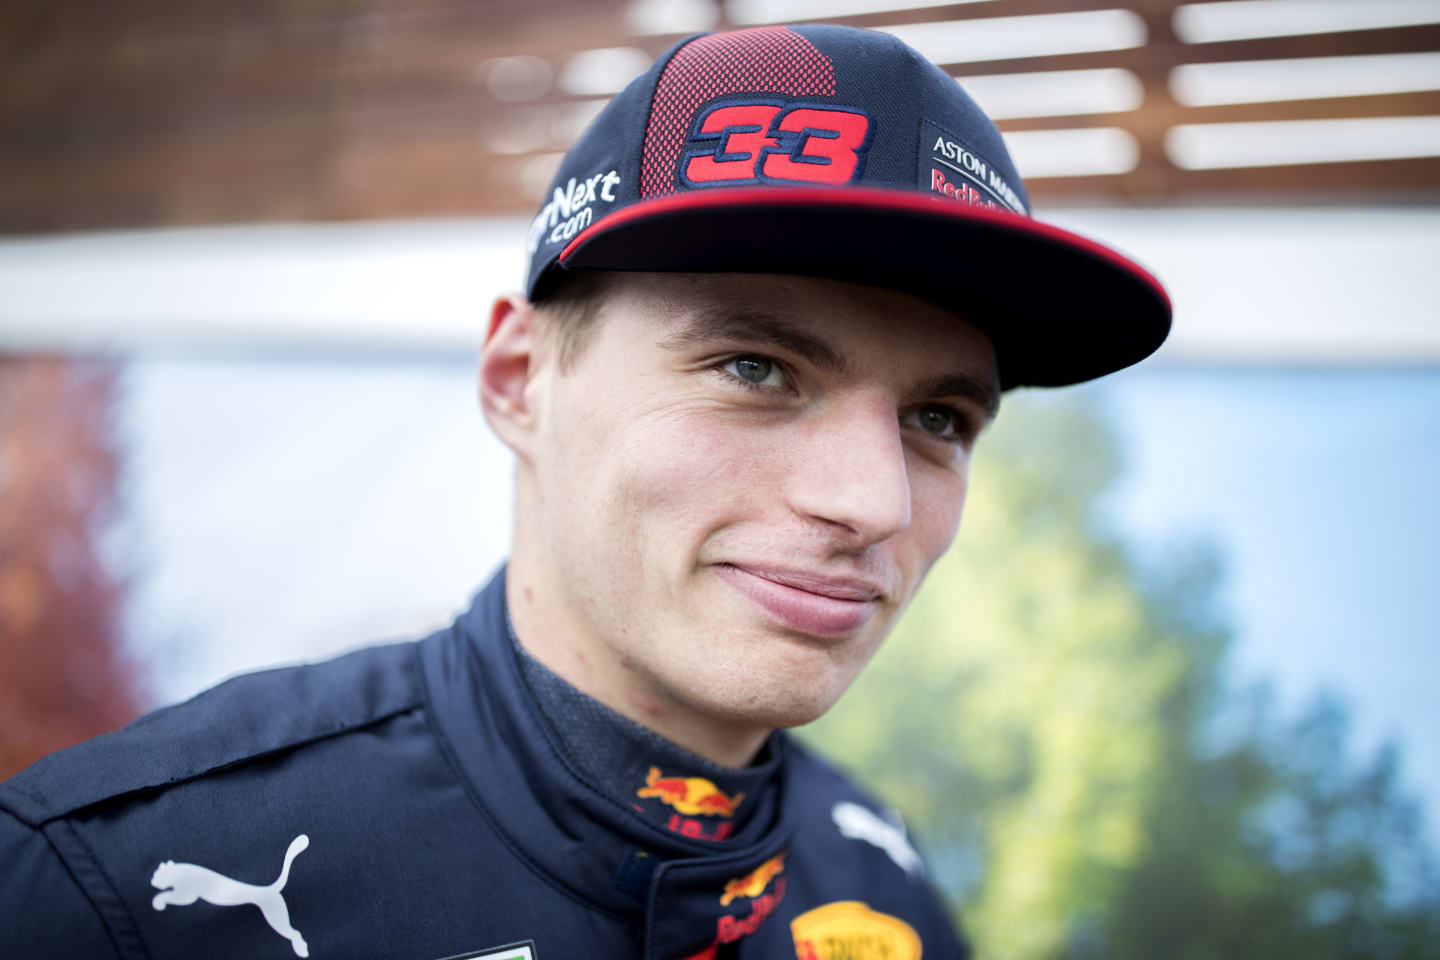 MELBOURNE, AUSTRALIA - MARCH 12: Max Verstappen of Netherlands and Red Bull Racing looks on in the